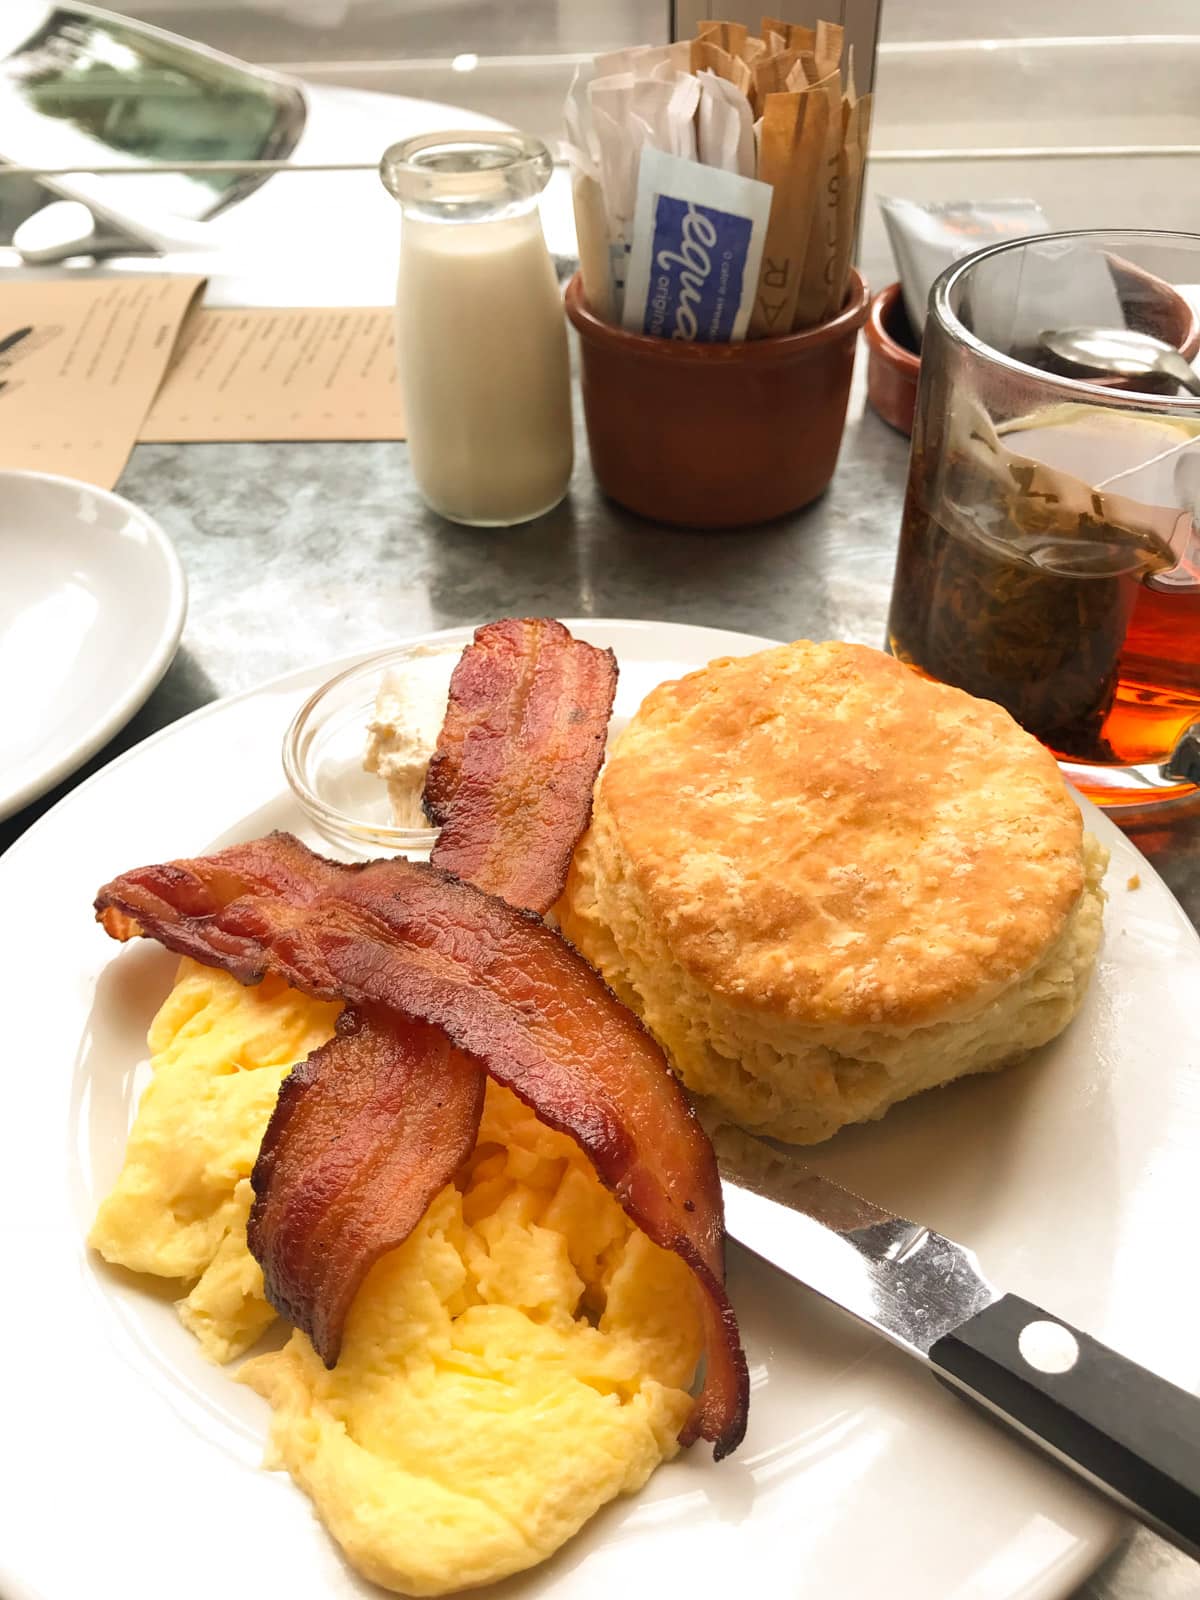 A plate served wuth eggs, bacon and an American-style biscuit. It is served at the inside window of a cafe.